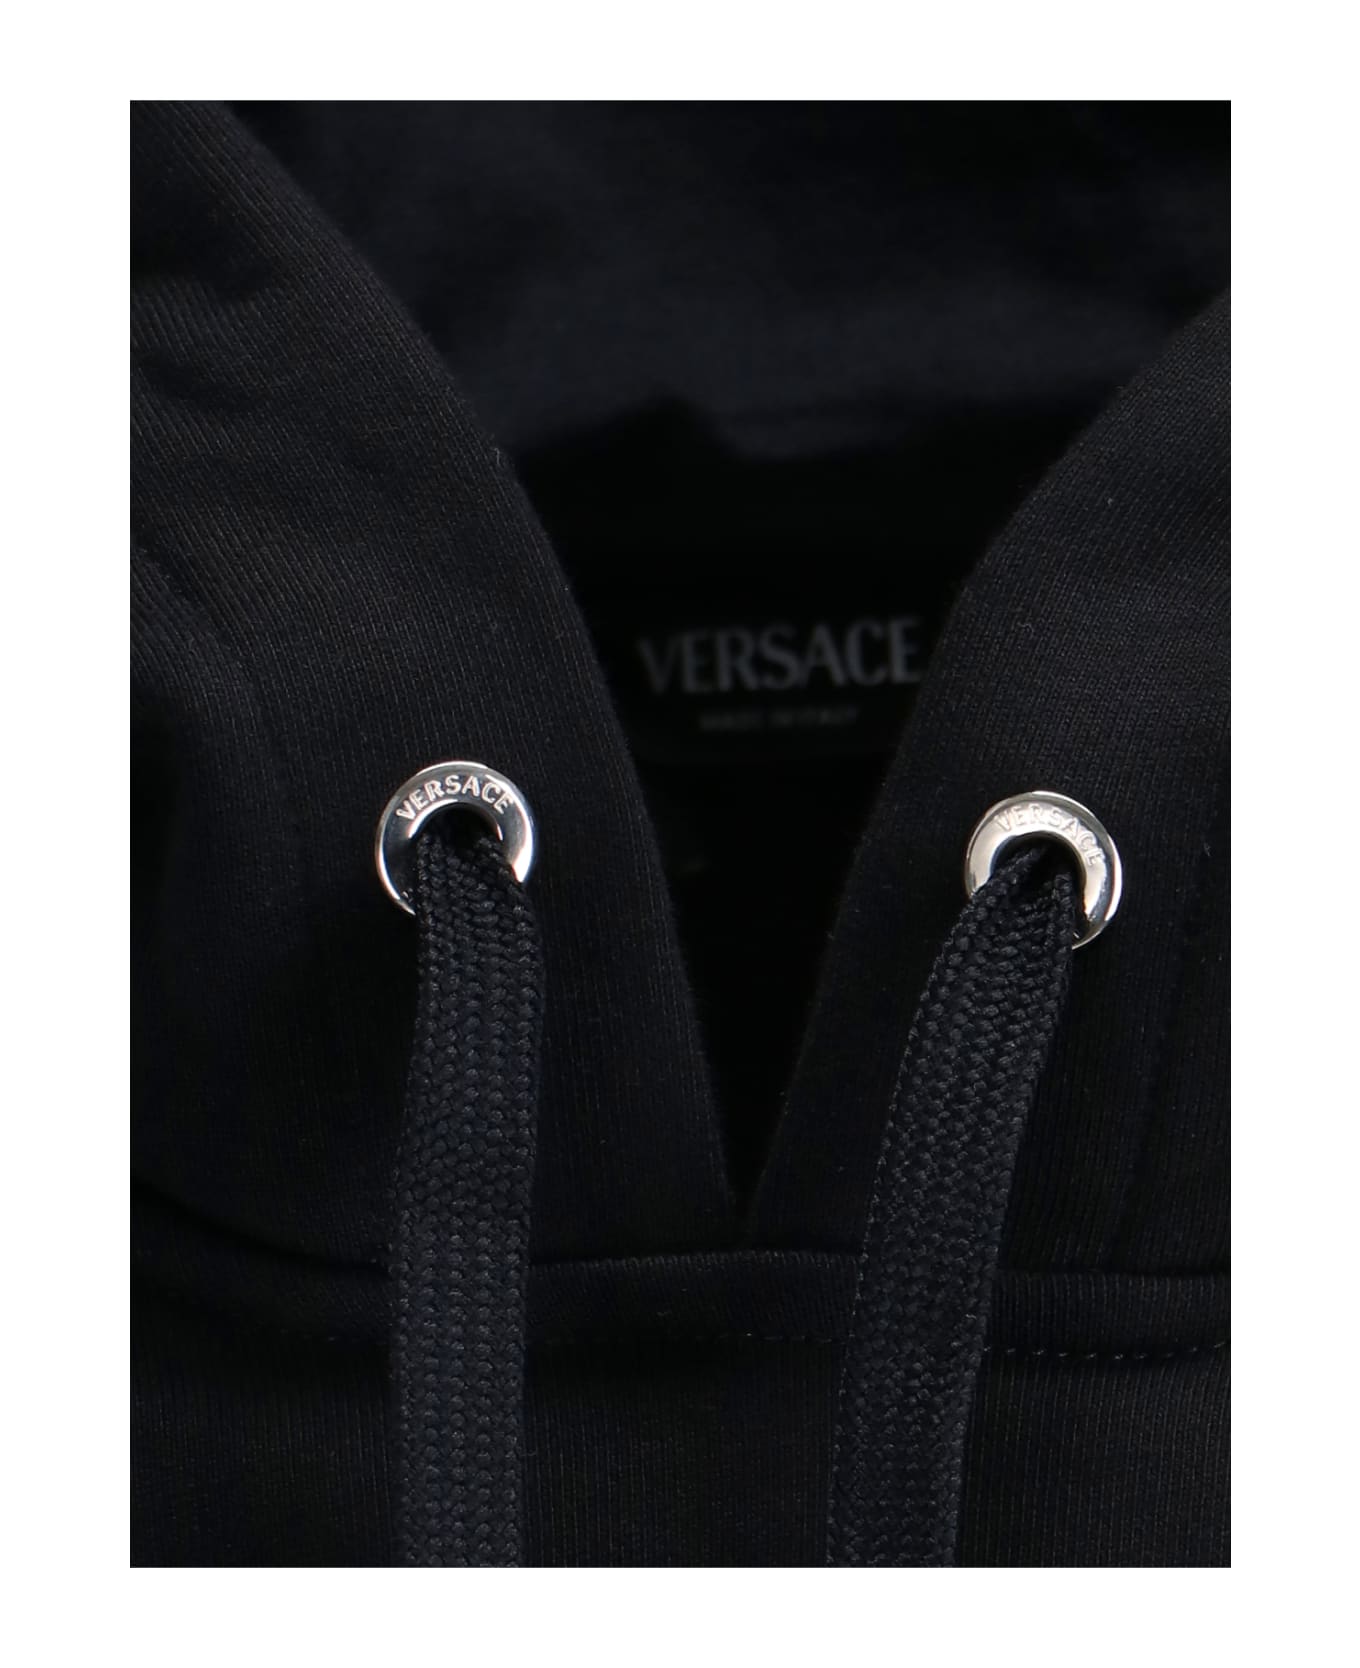 Versace Black Hoodie With Contrasting Logo Lettering Print In Cotton Man - Black